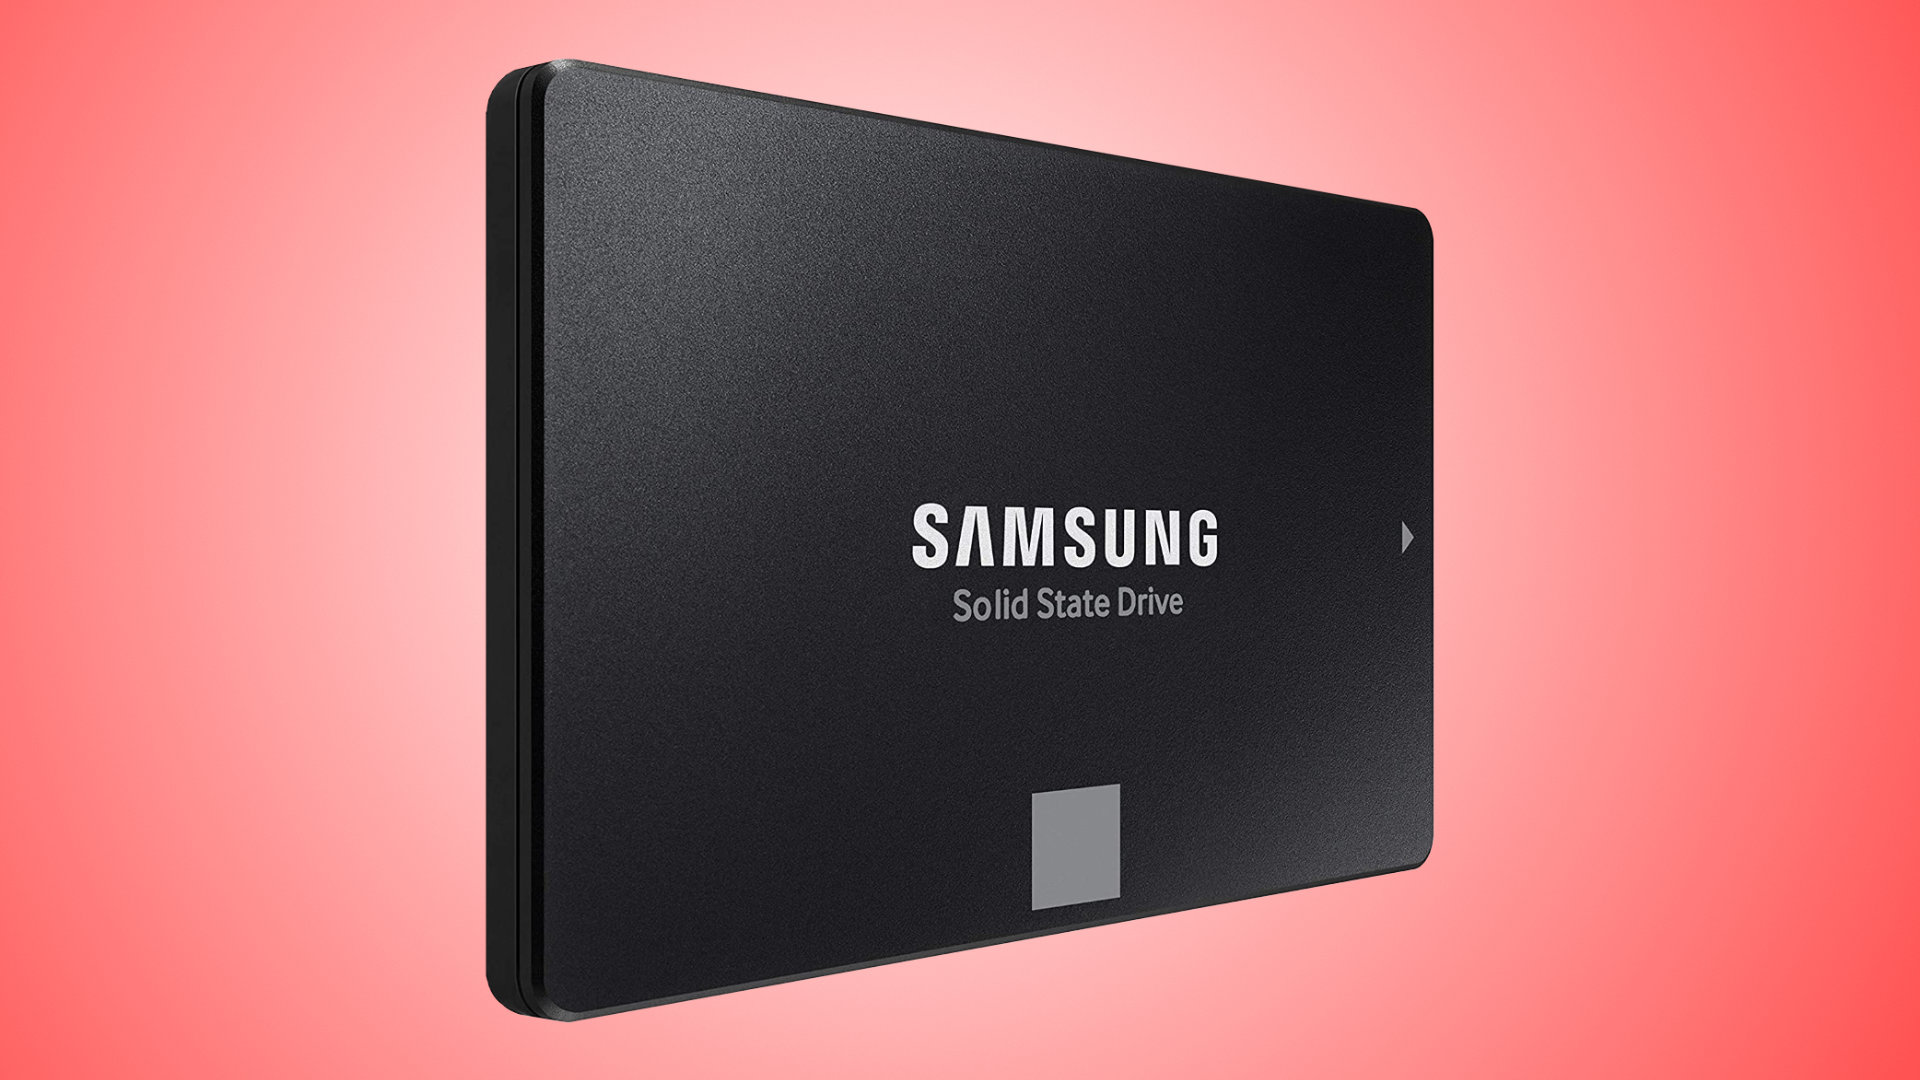 Samsung 870 EVO 2TB SSD drops to its lowest price ever on Amazon